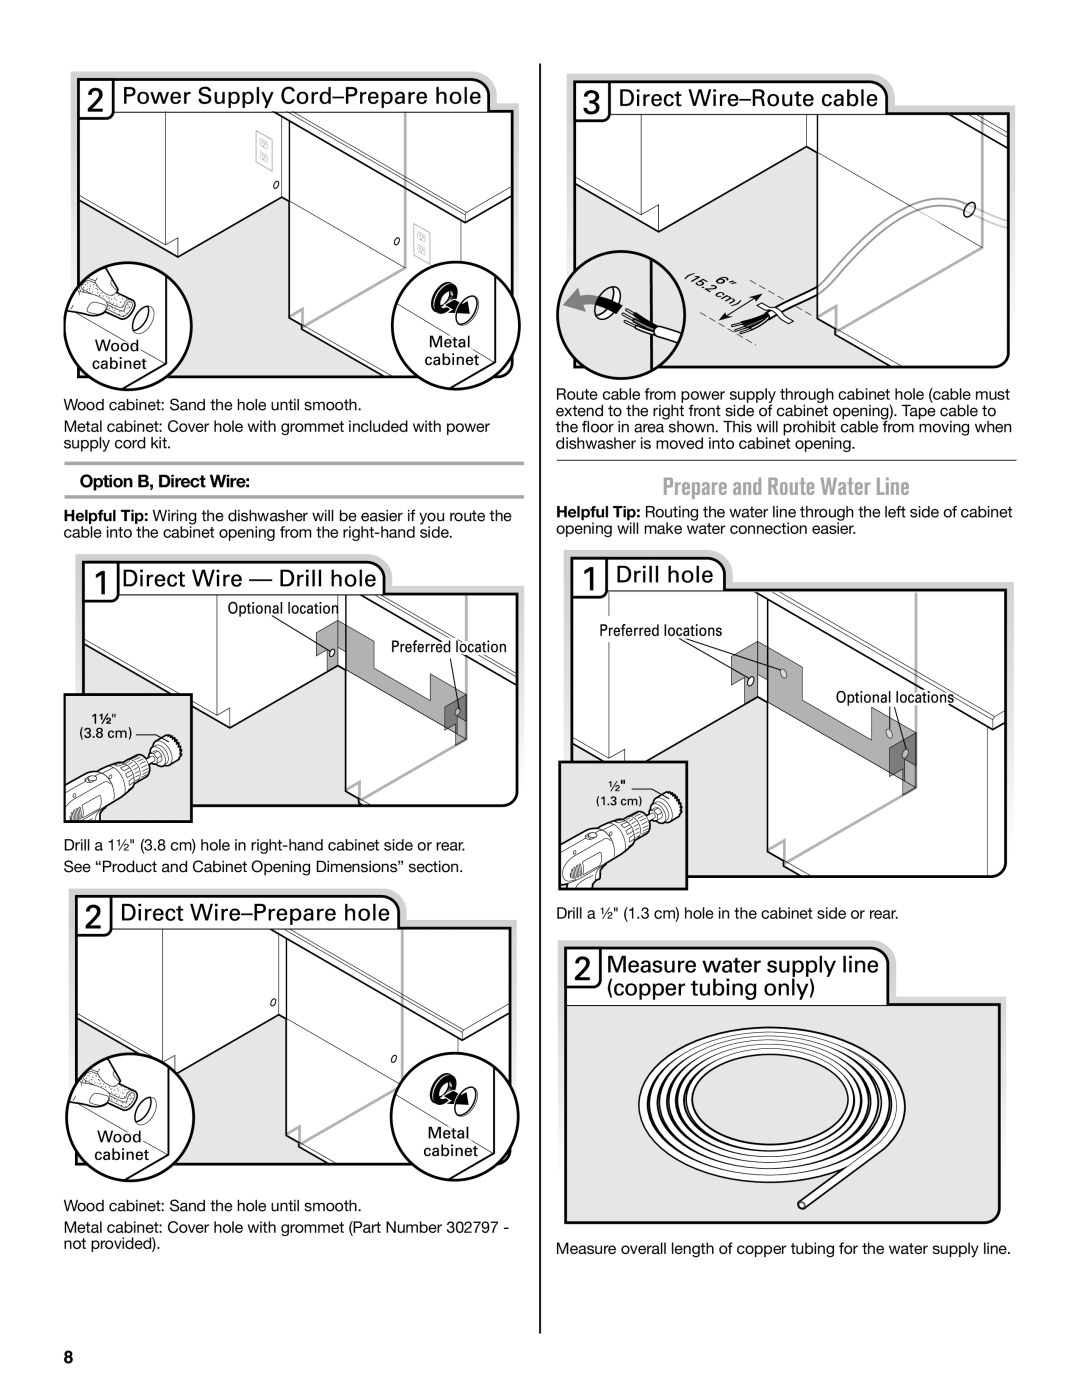 Maytag W10649077A installation instructions Prepare and Route Water Line, Option B, Direct Wire 